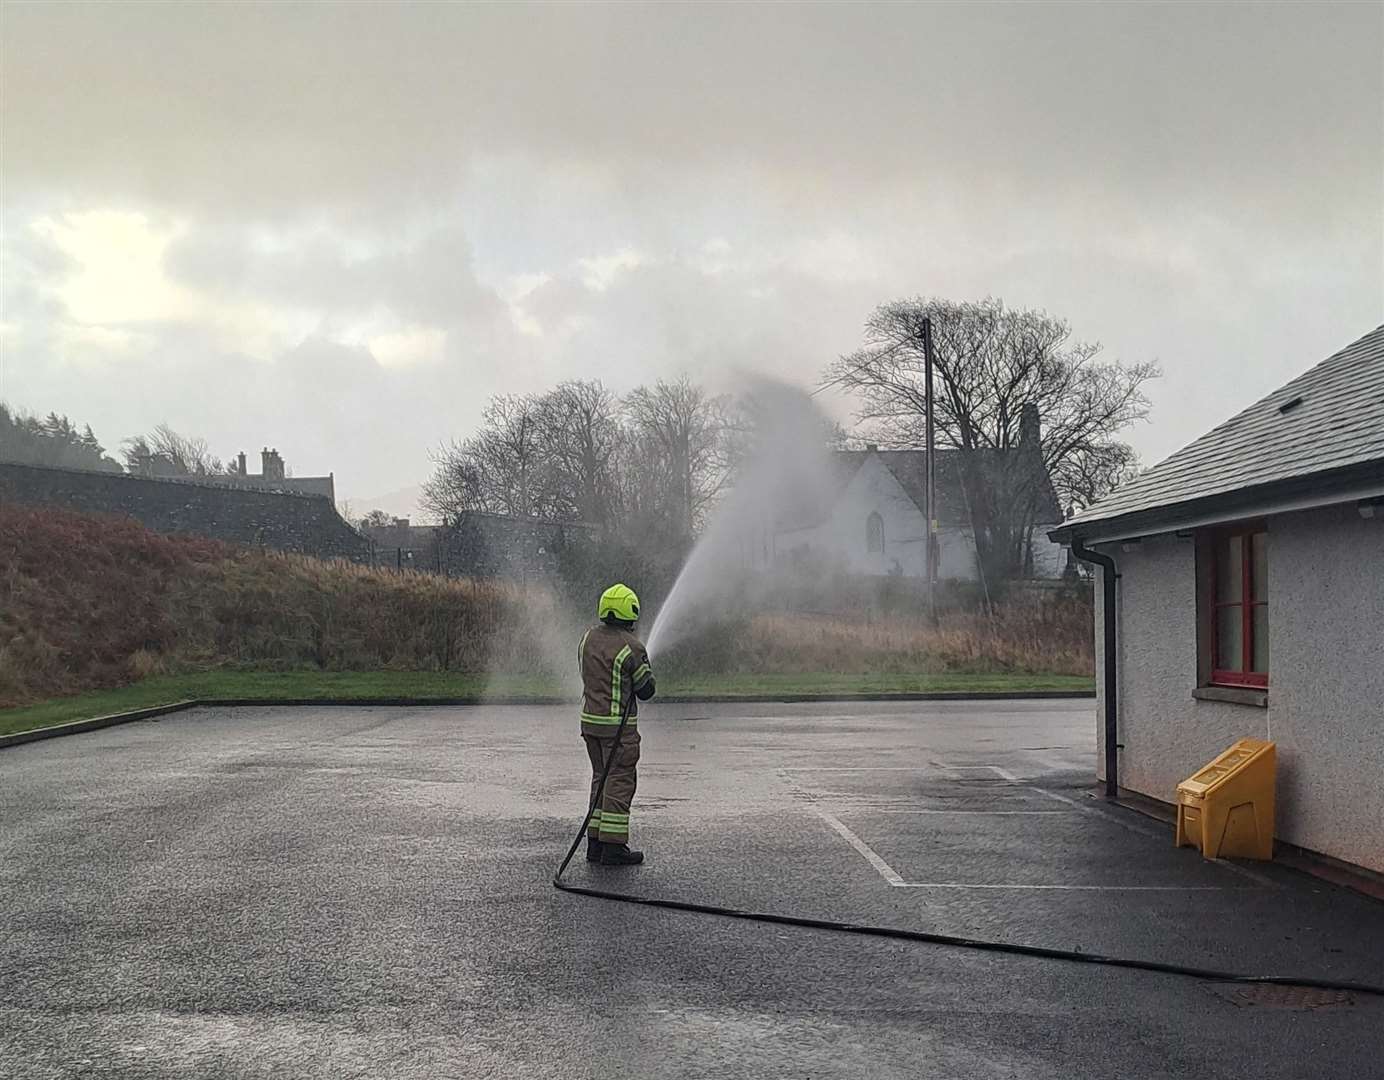 A demonstration of the unit's powerful hose in action was enjoyed by the youngsters.